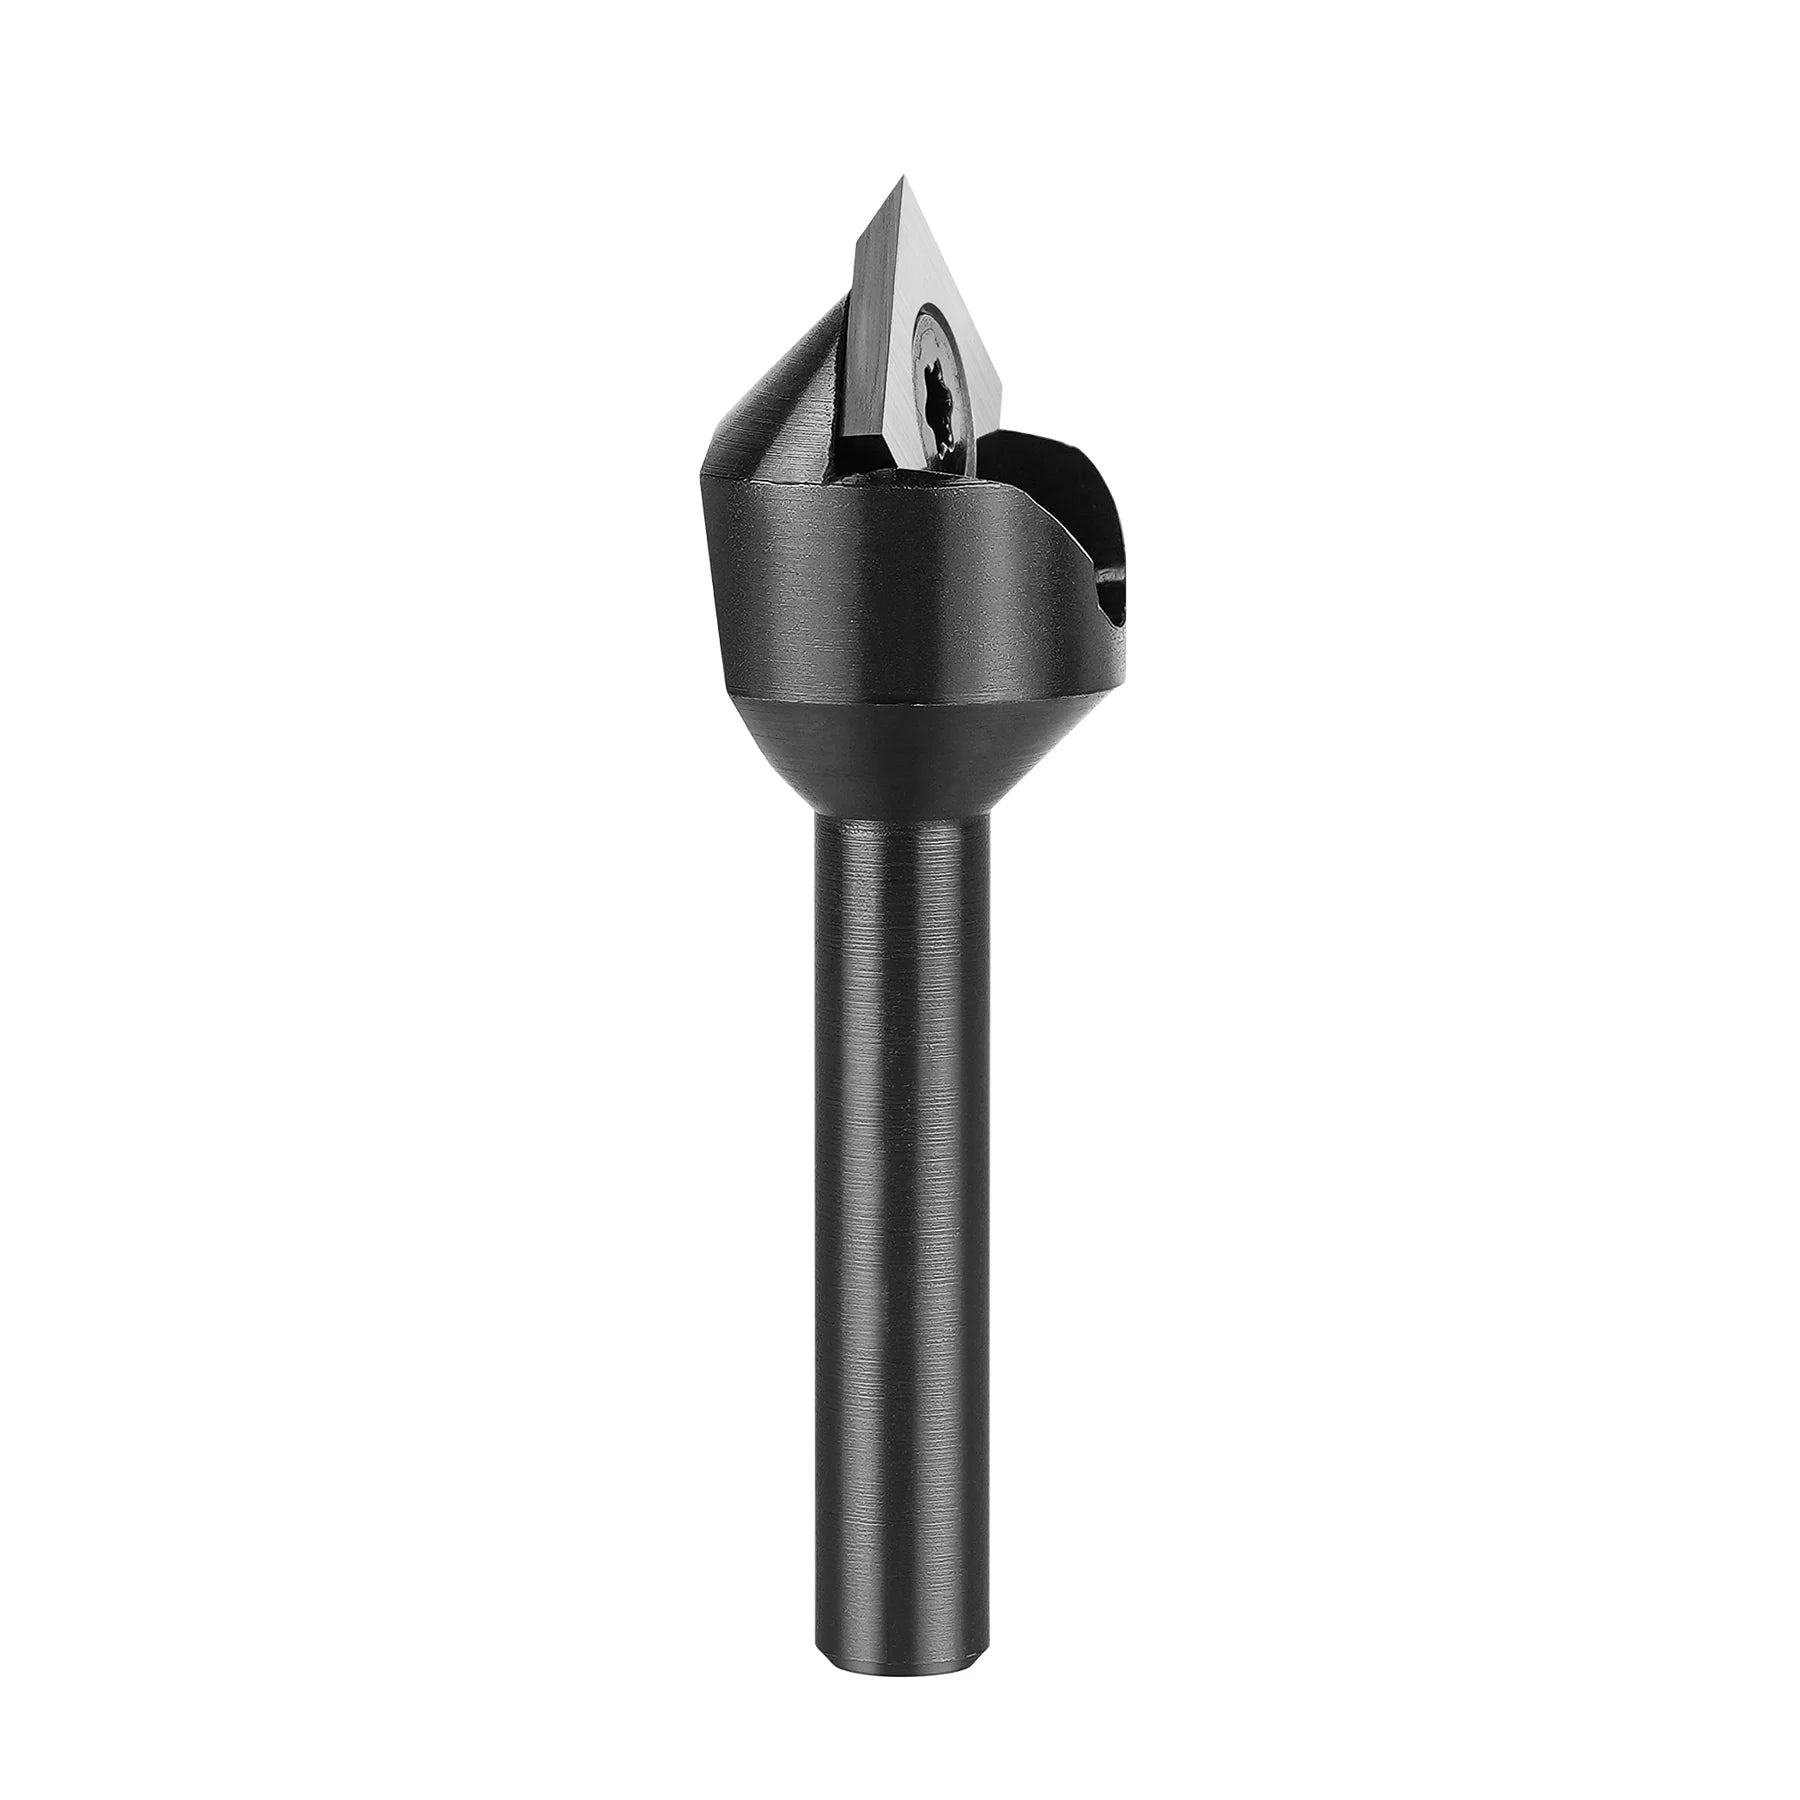 SpeTool 90 Degree V Groove Router Bit With Carbide Insert 1-4 Shank